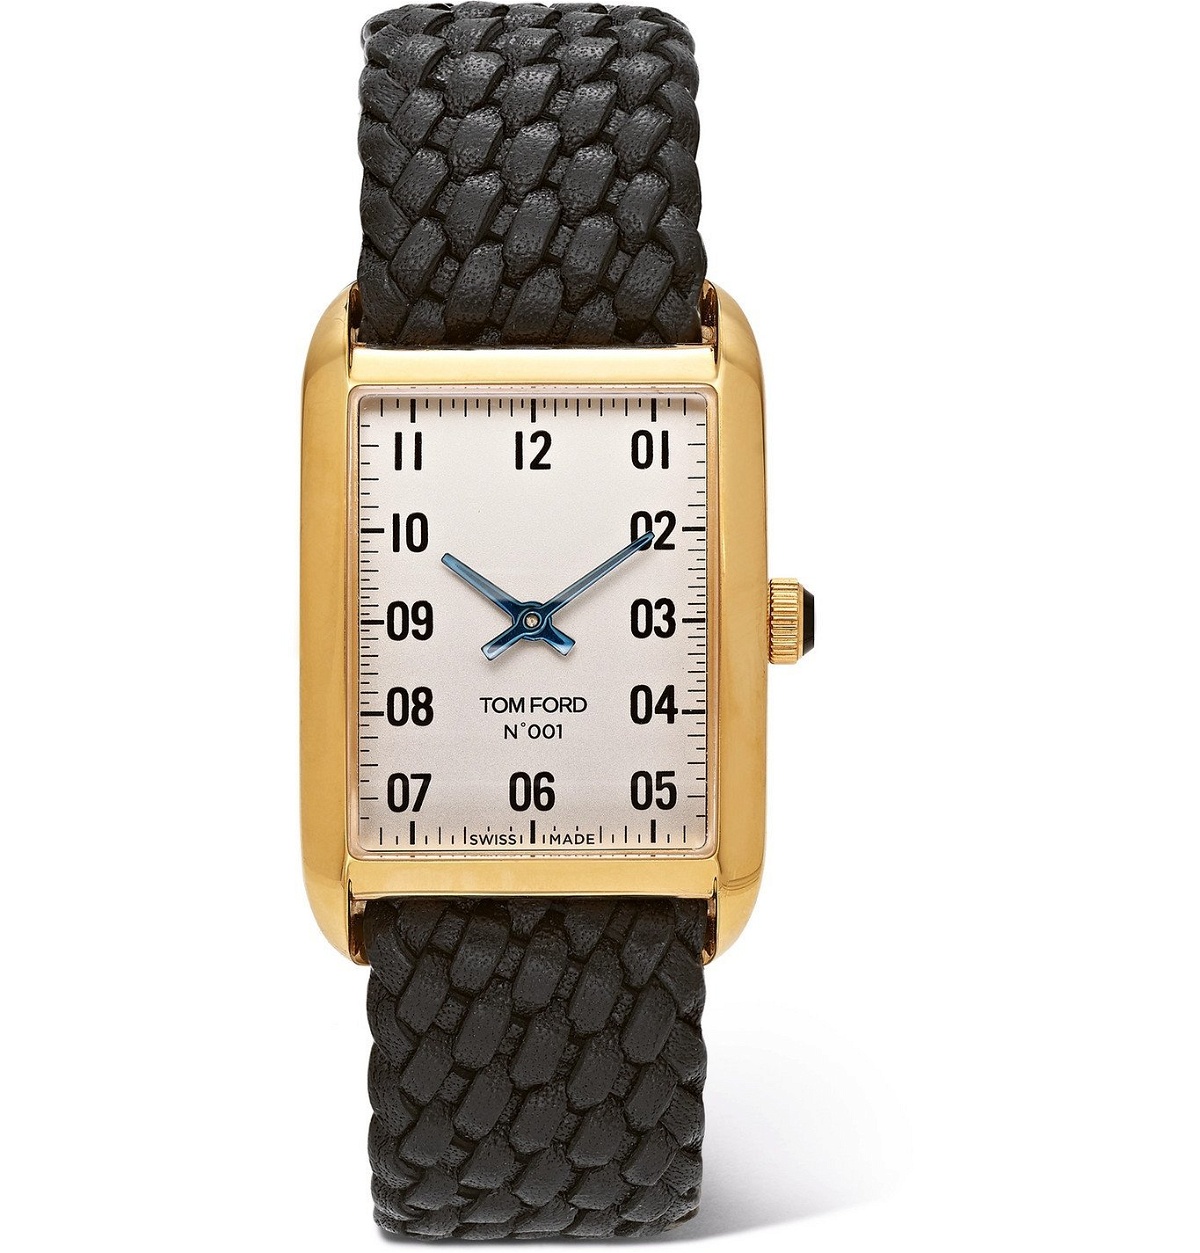 Tom Ford Timepieces 001 18-Karat Gold and Woven Leather Watch White Tom Ford Timepieces